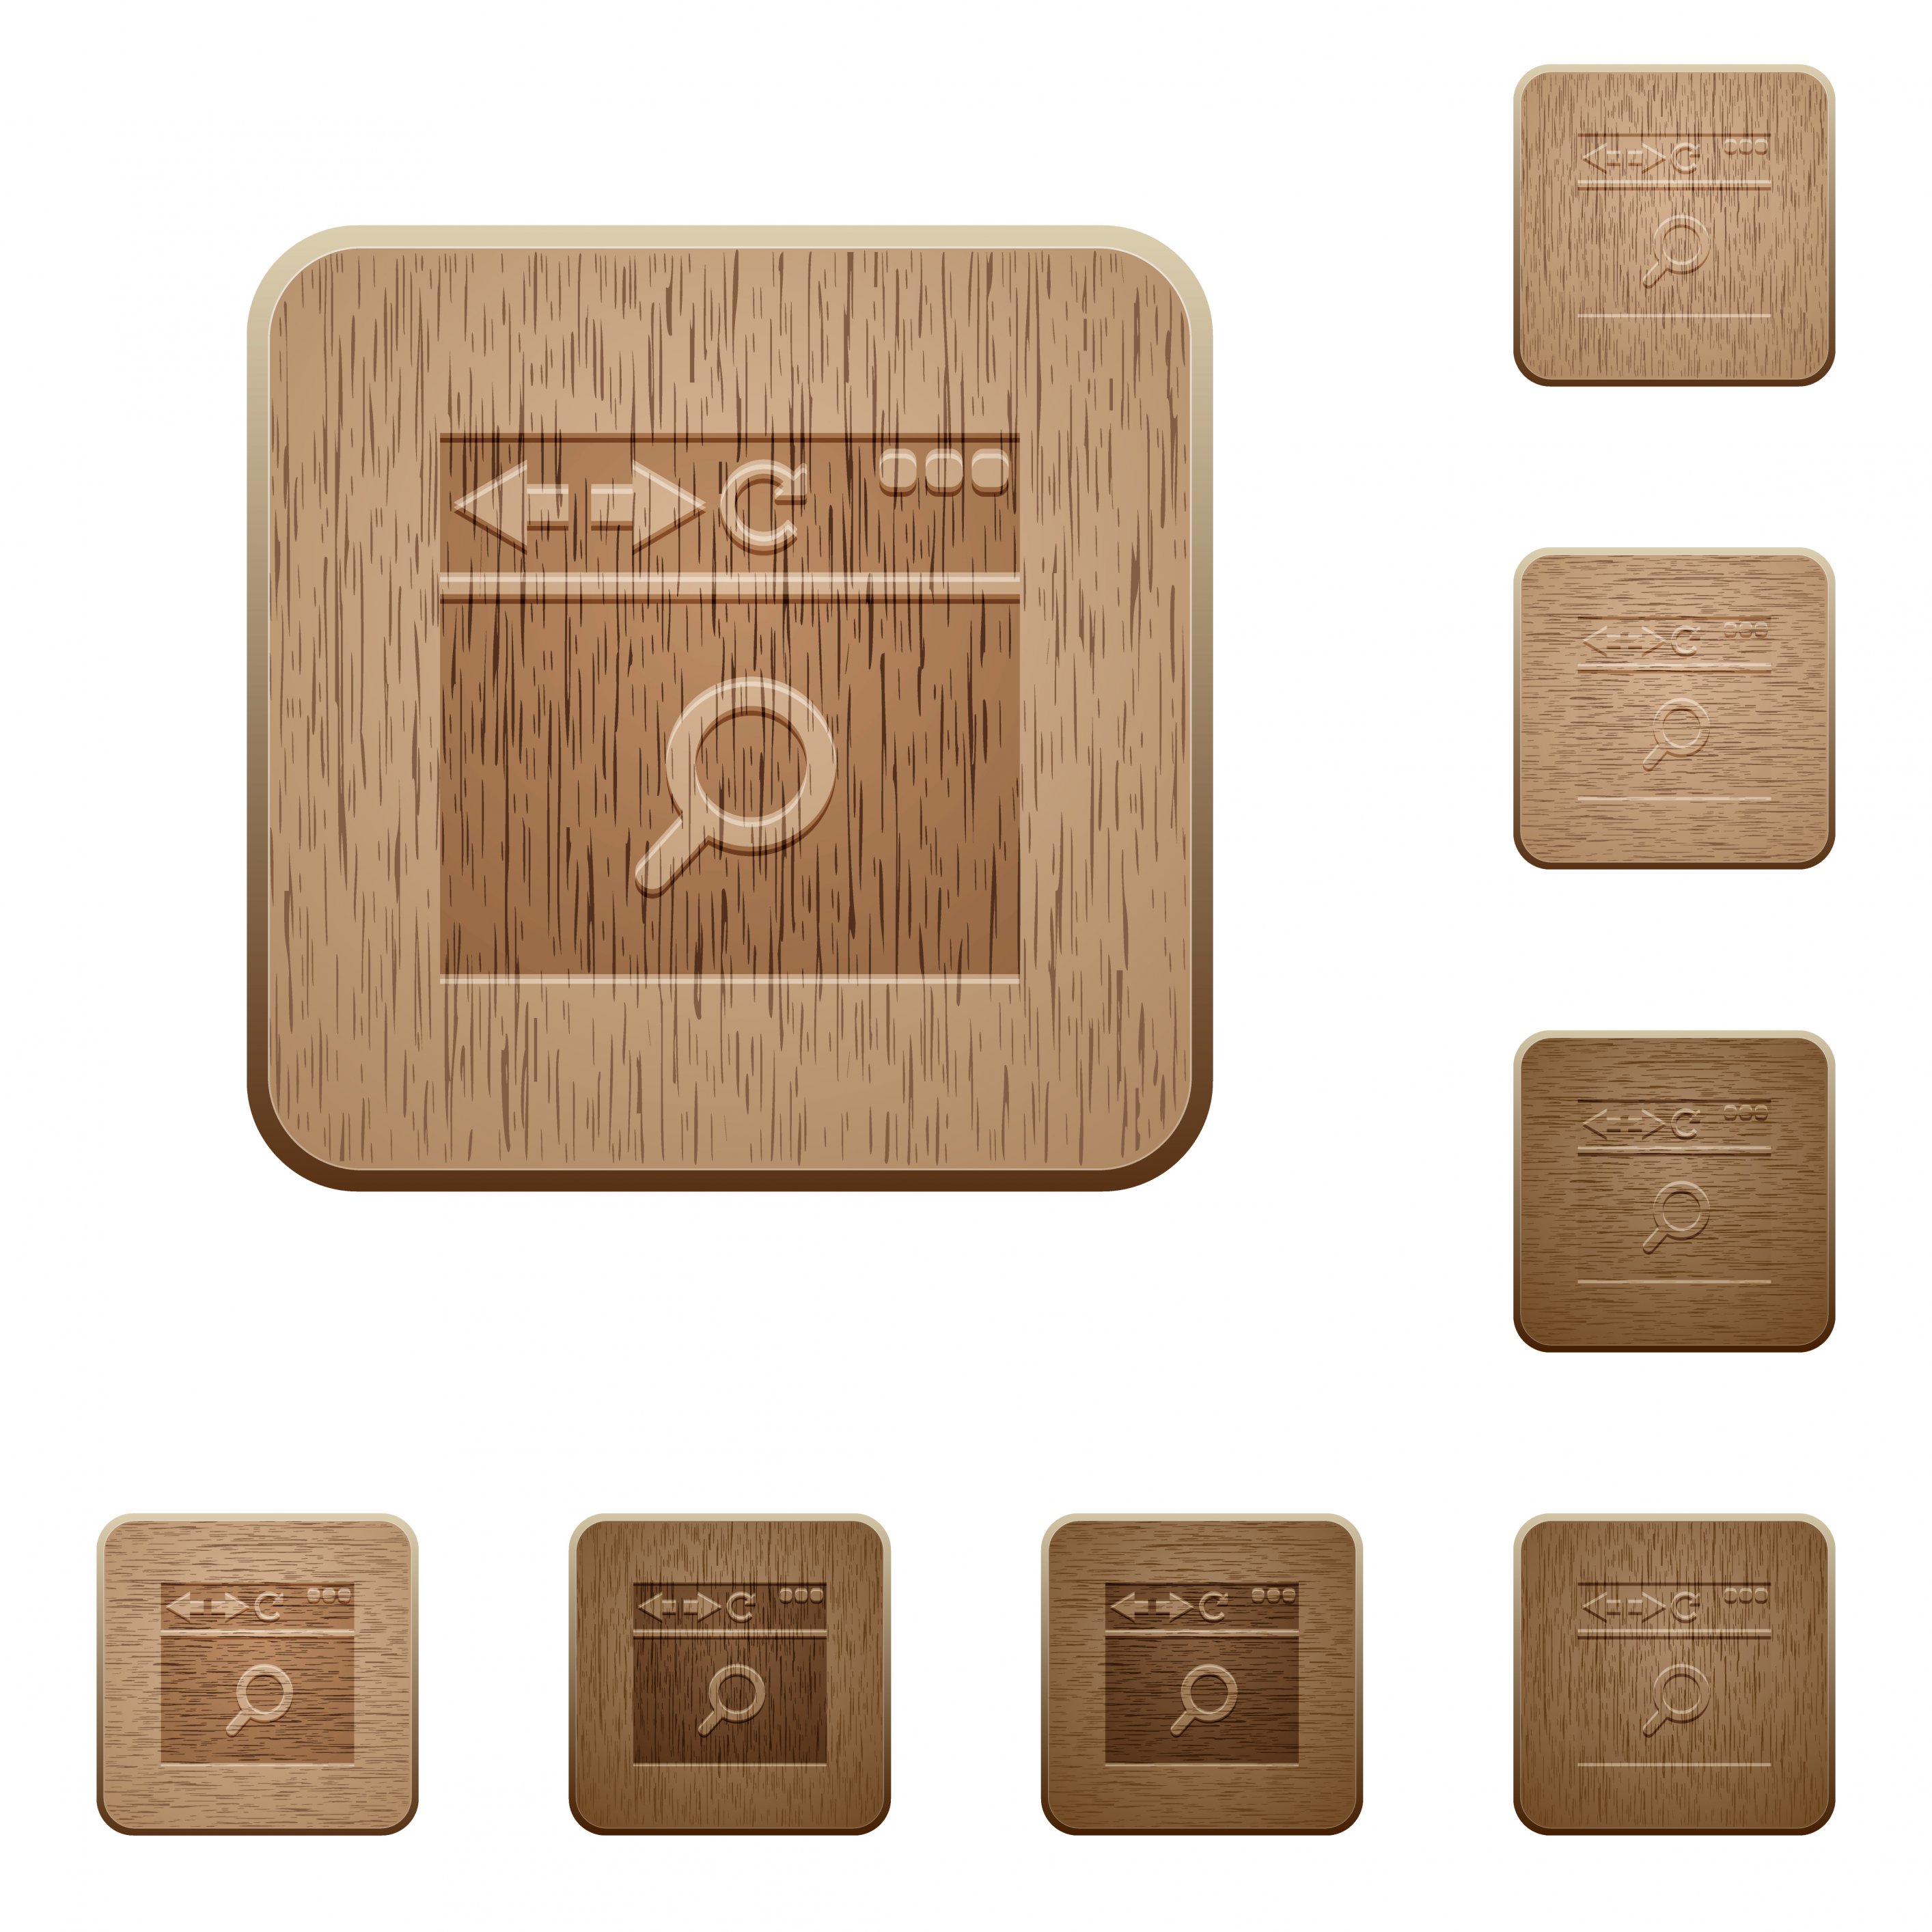 Browser search on rounded square carved wooden button styles - Free image